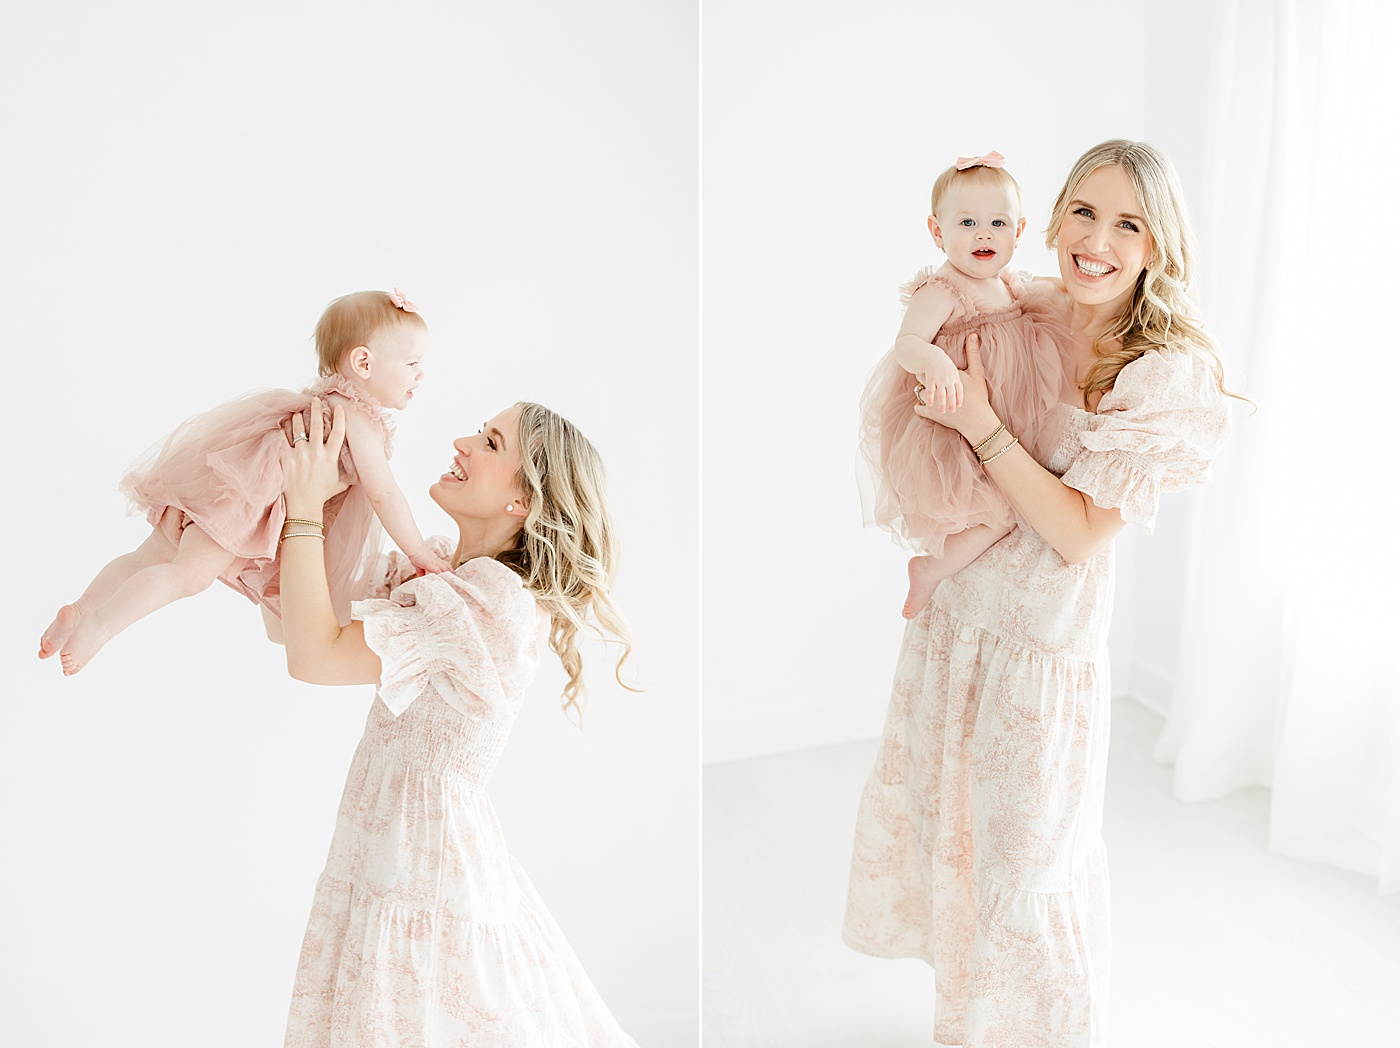 Mom holding her daughter during first birthday photoshoot | Kristin Wood Photography